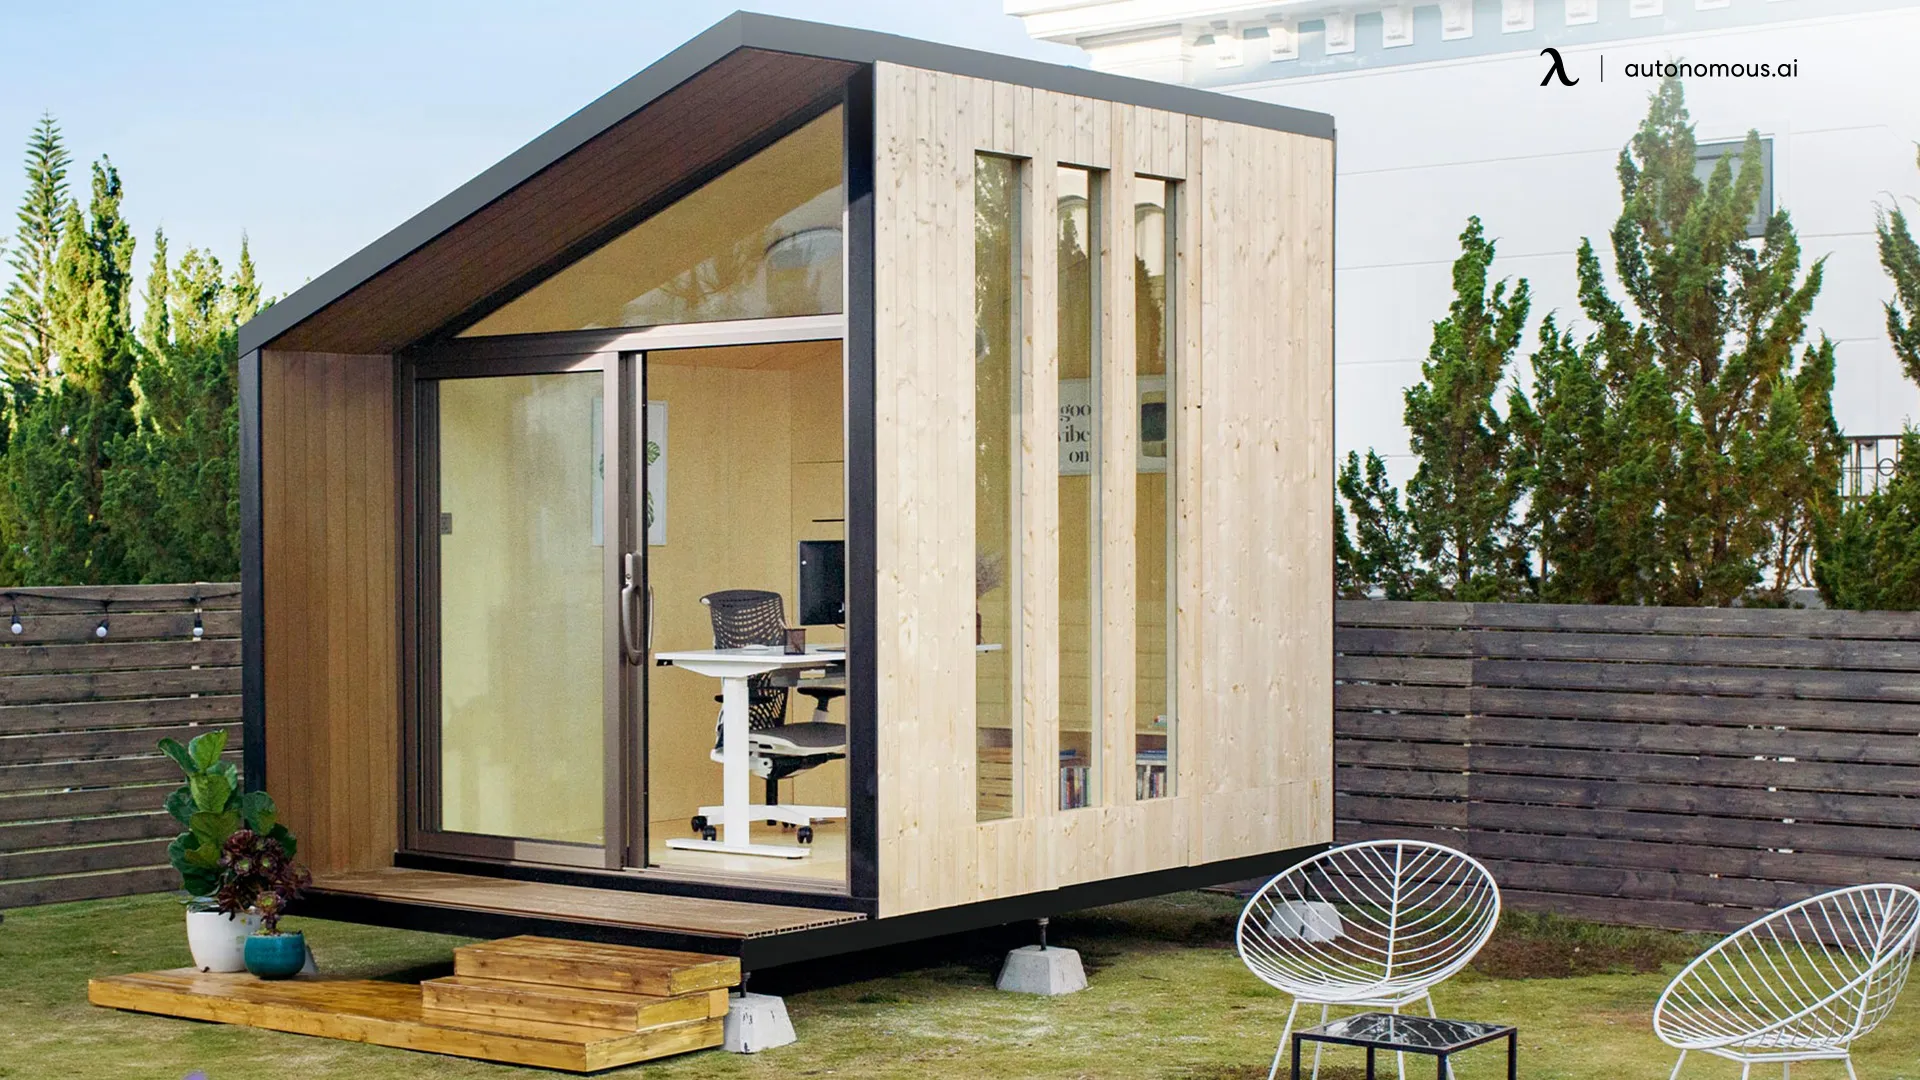 Skip the Hassle and Invest in a Prefab ADU!